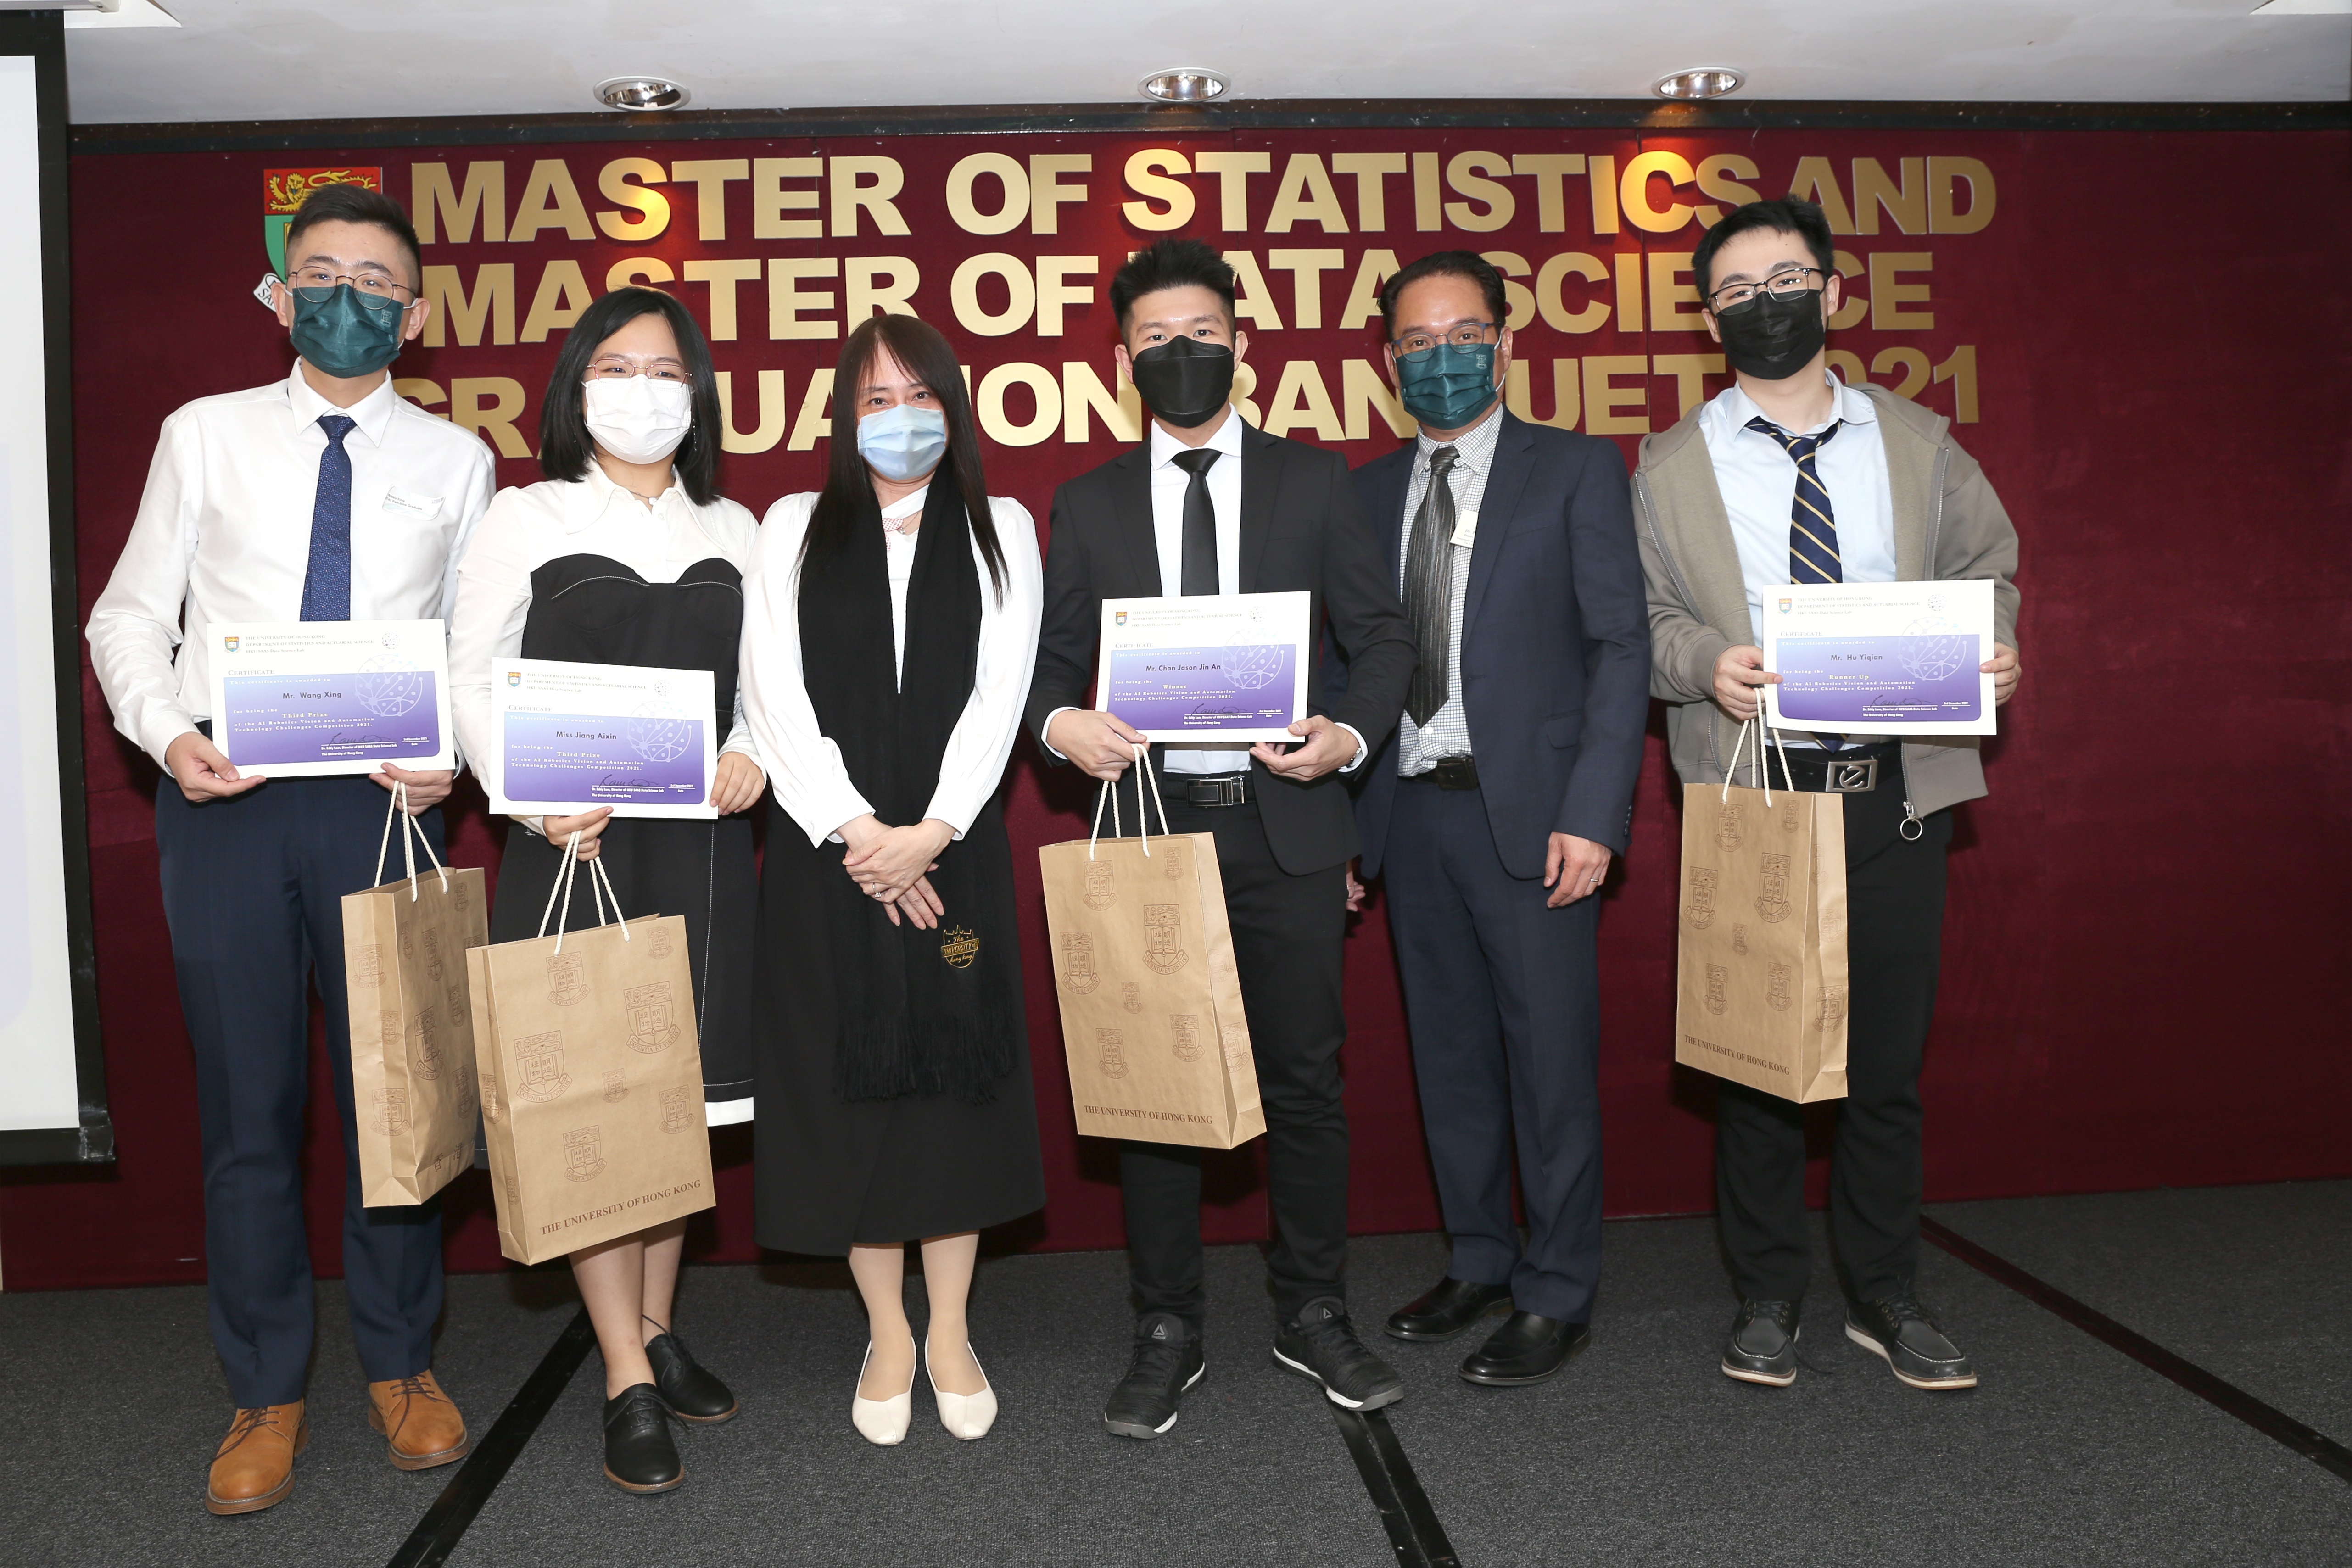 The winning team of the university category